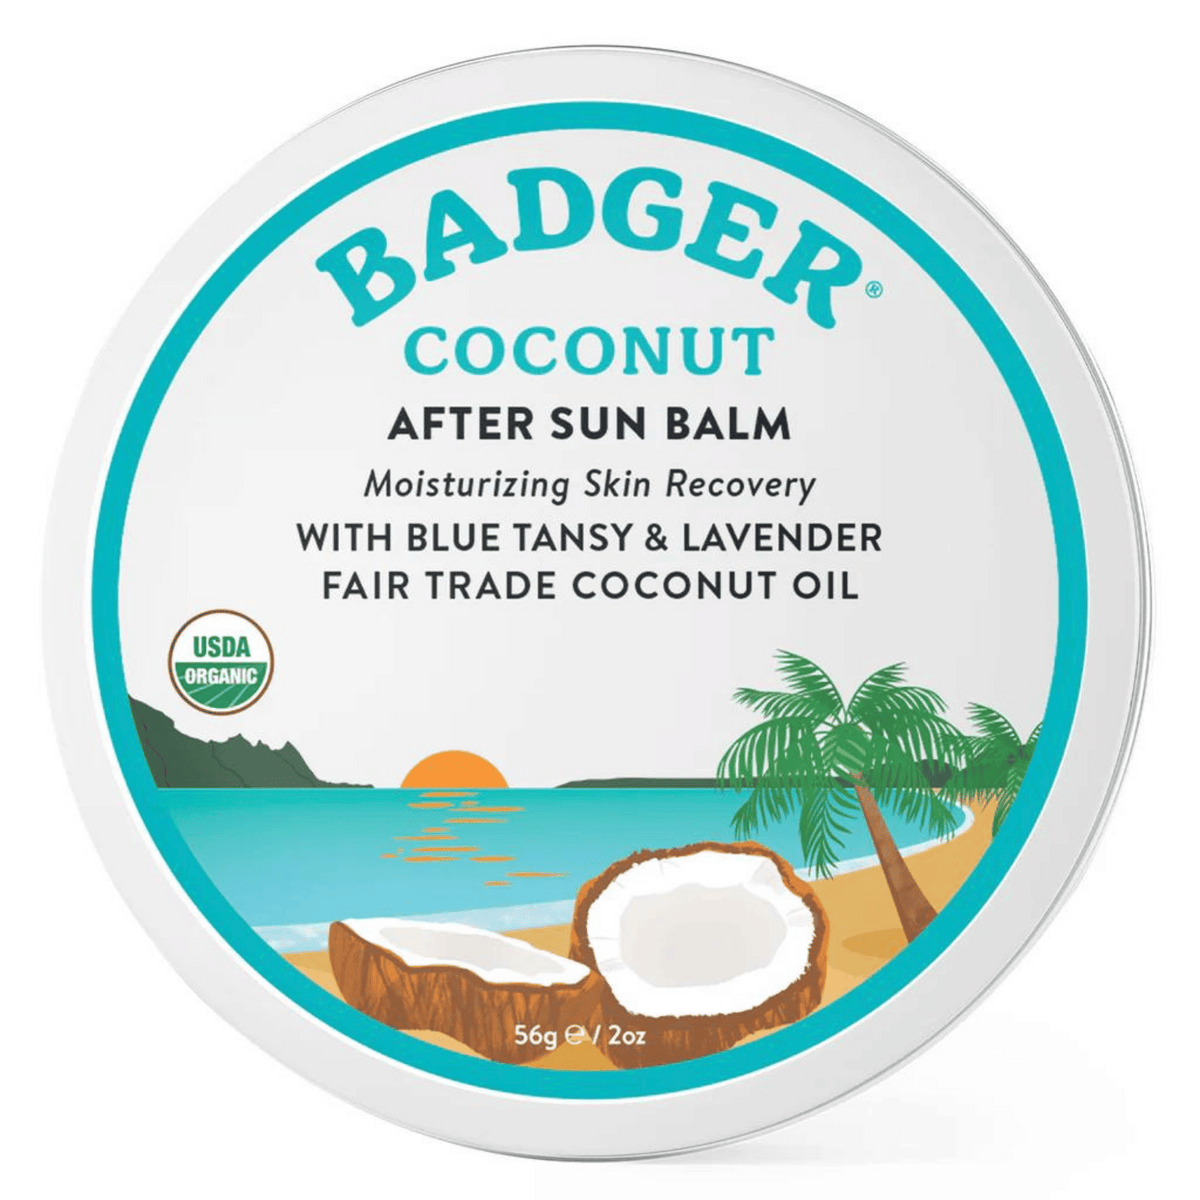 Primary Image of Coconut After Sun Balm Tin